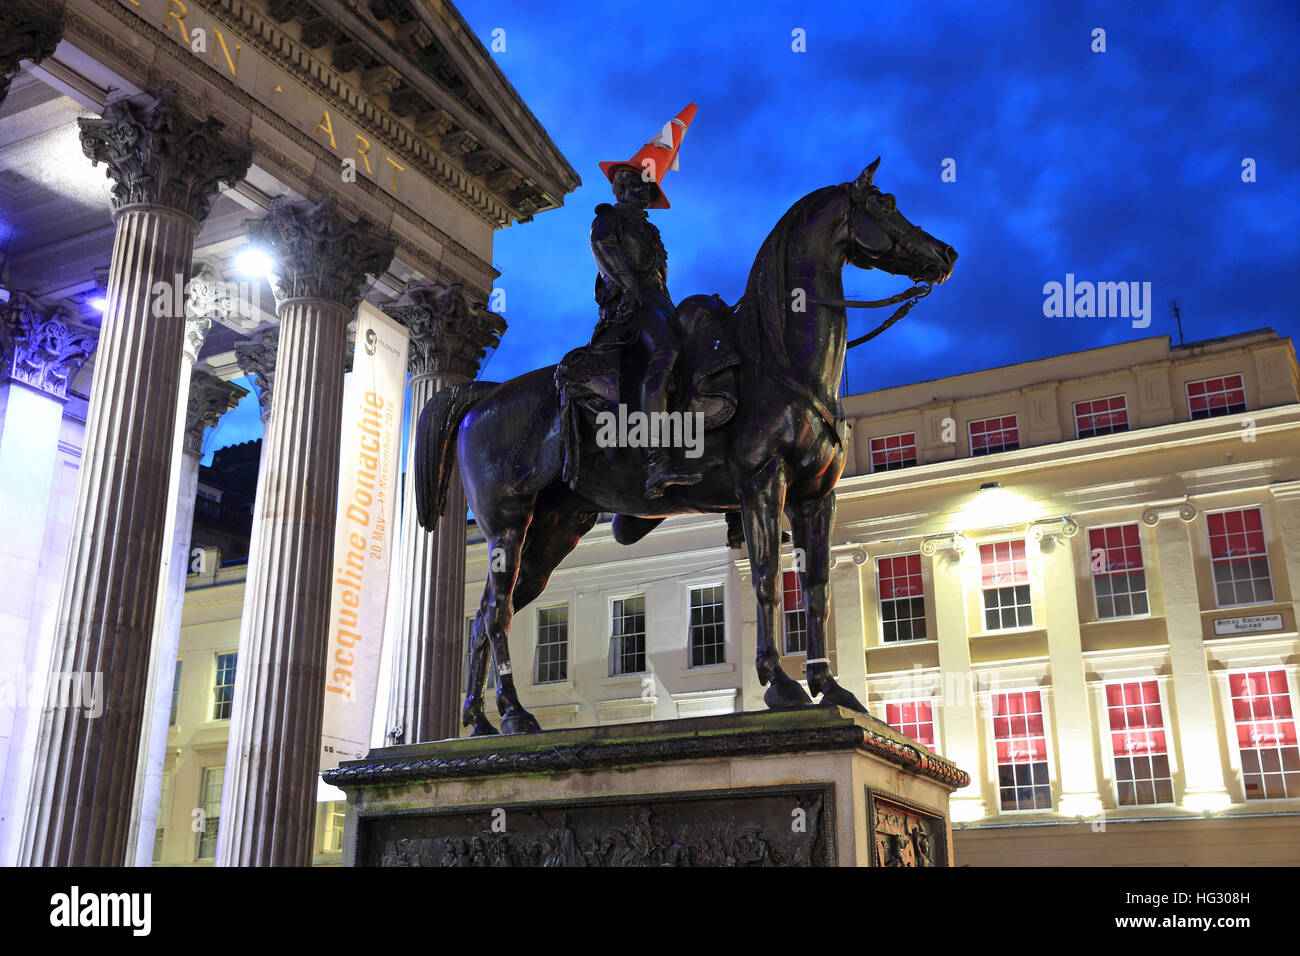 The iconic traffic cone on top of the Wellington statue in front of the Gallery of Modern Art, in Glasgow, Scotland, UK Stock Photo